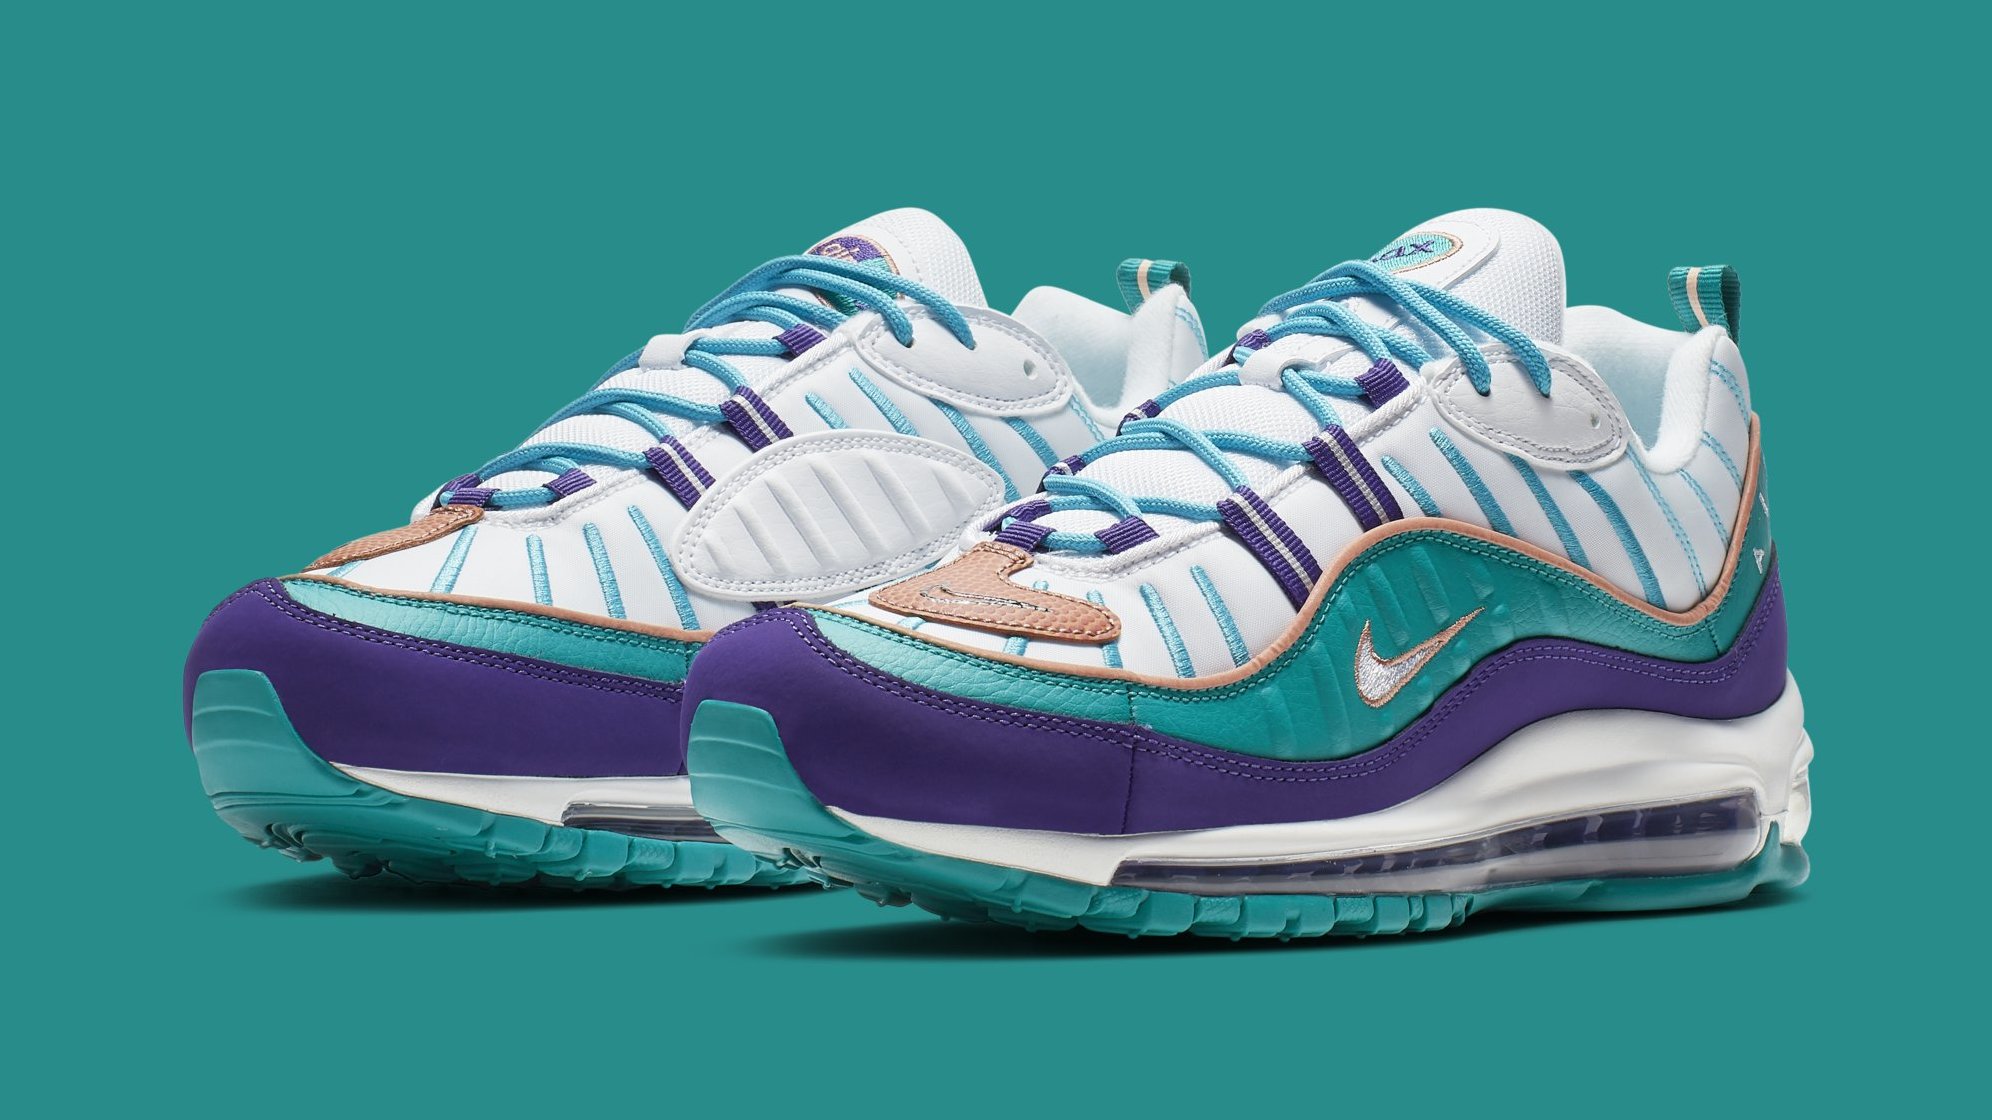 ødemark Bare gør Give Charlotte Hornets Colors Cover This Air Max 98 | Complex